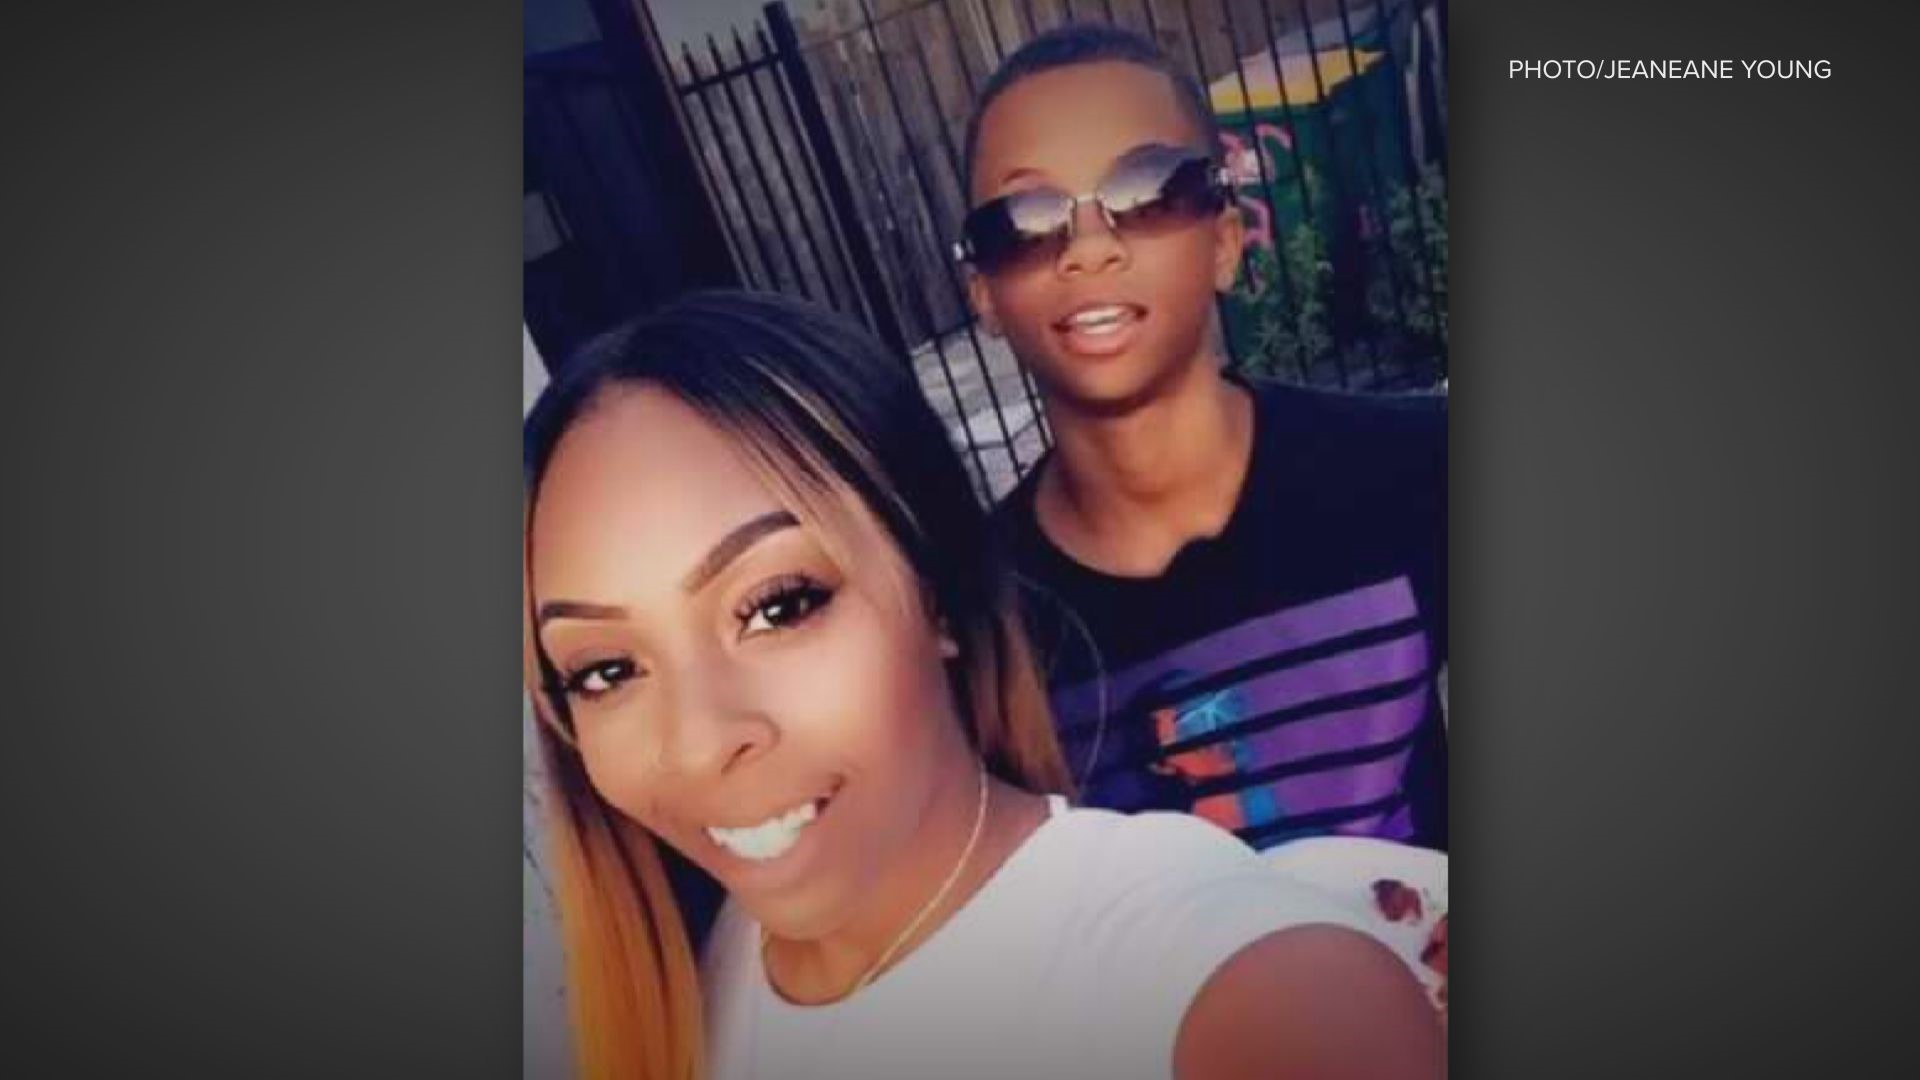 She watched as a gunman opened fire on her 15-year-old son, while they were waiting in line at a Burger King drive-thru.